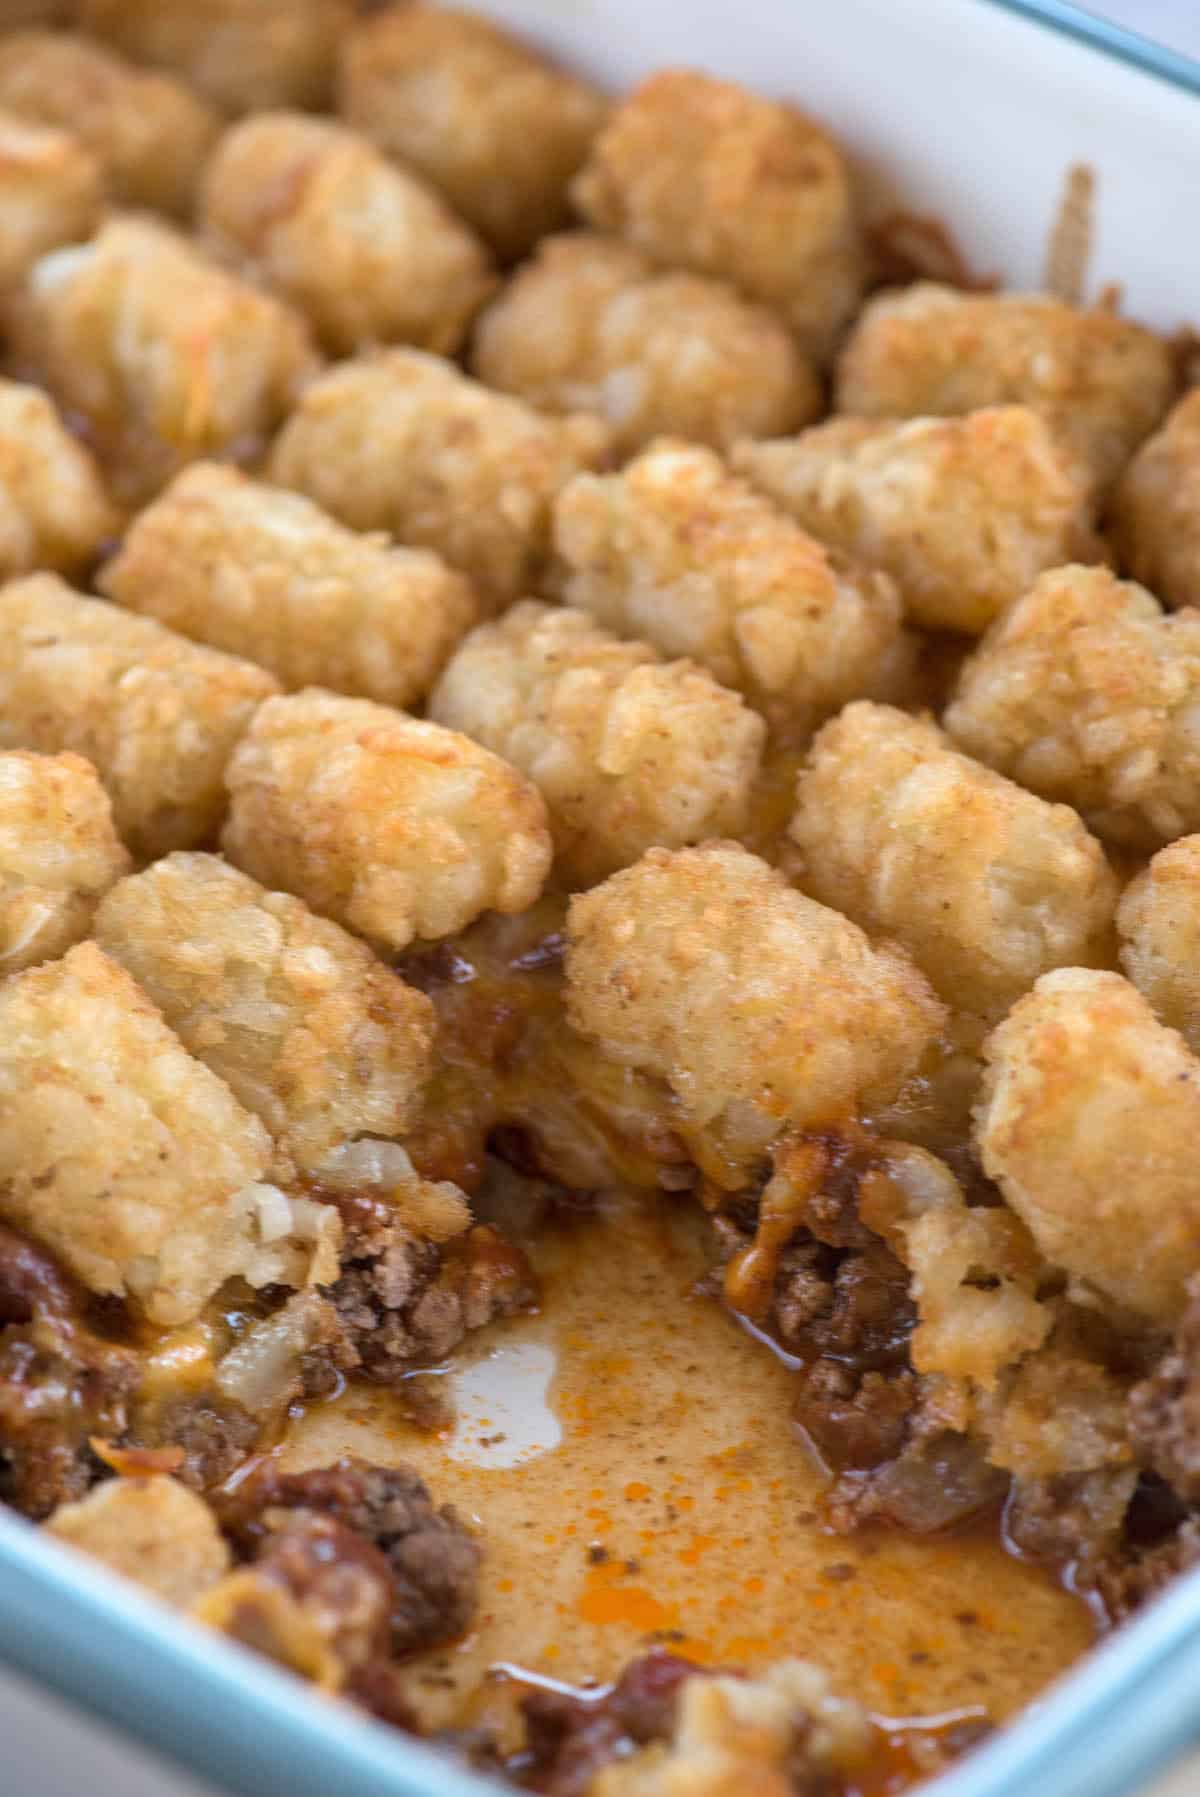 pan with tater tot casserole missing a slice